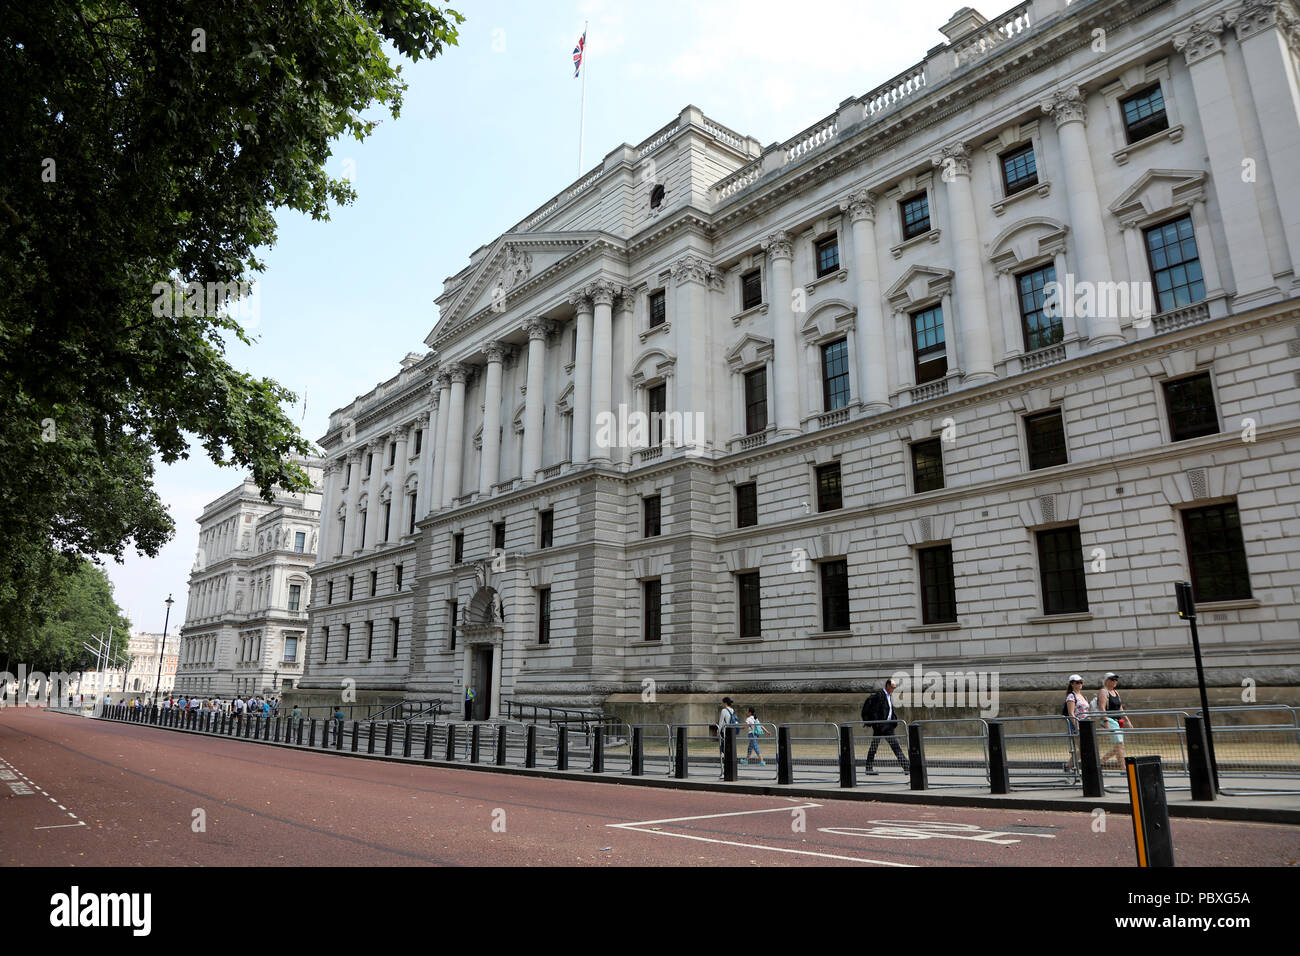 London / UK - July 26 2018: View of HM Treasury, the UK’s finance ministry, on Horse Guards Road Stock Photo